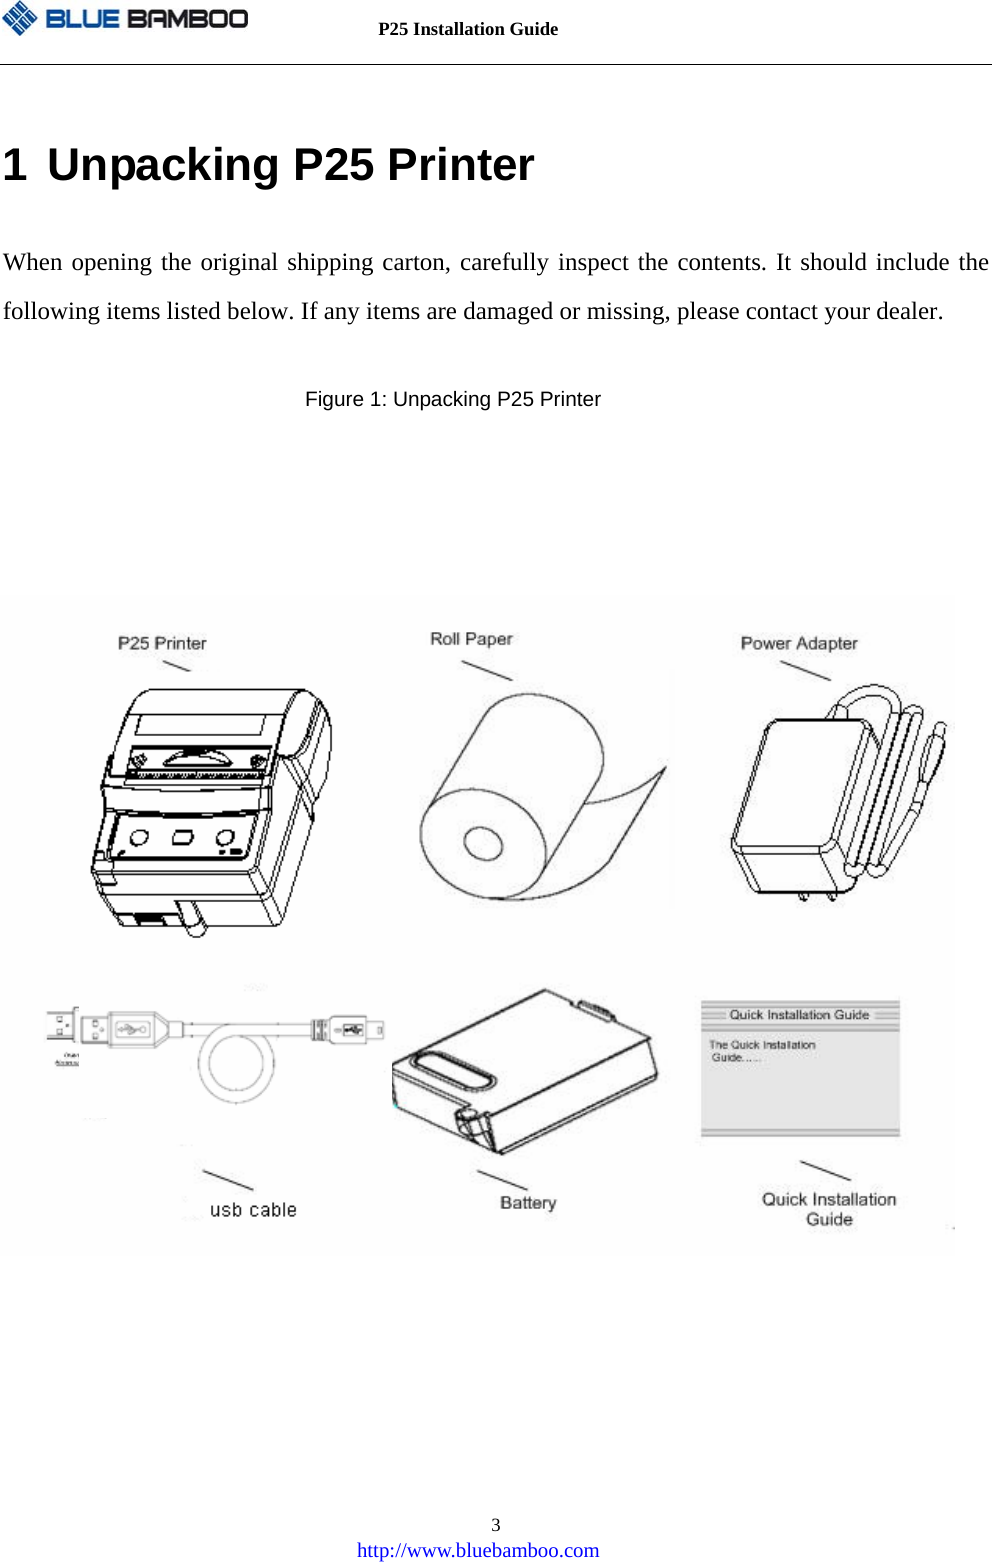          P25 Installation Guide   http://www.bluebamboo.com 31 Unpacking P25 Printer When opening the original shipping carton, carefully inspect the contents. It should include the following items listed below. If any items are damaged or missing, please contact your dealer.            Figure 1: Unpacking P25 Printer        